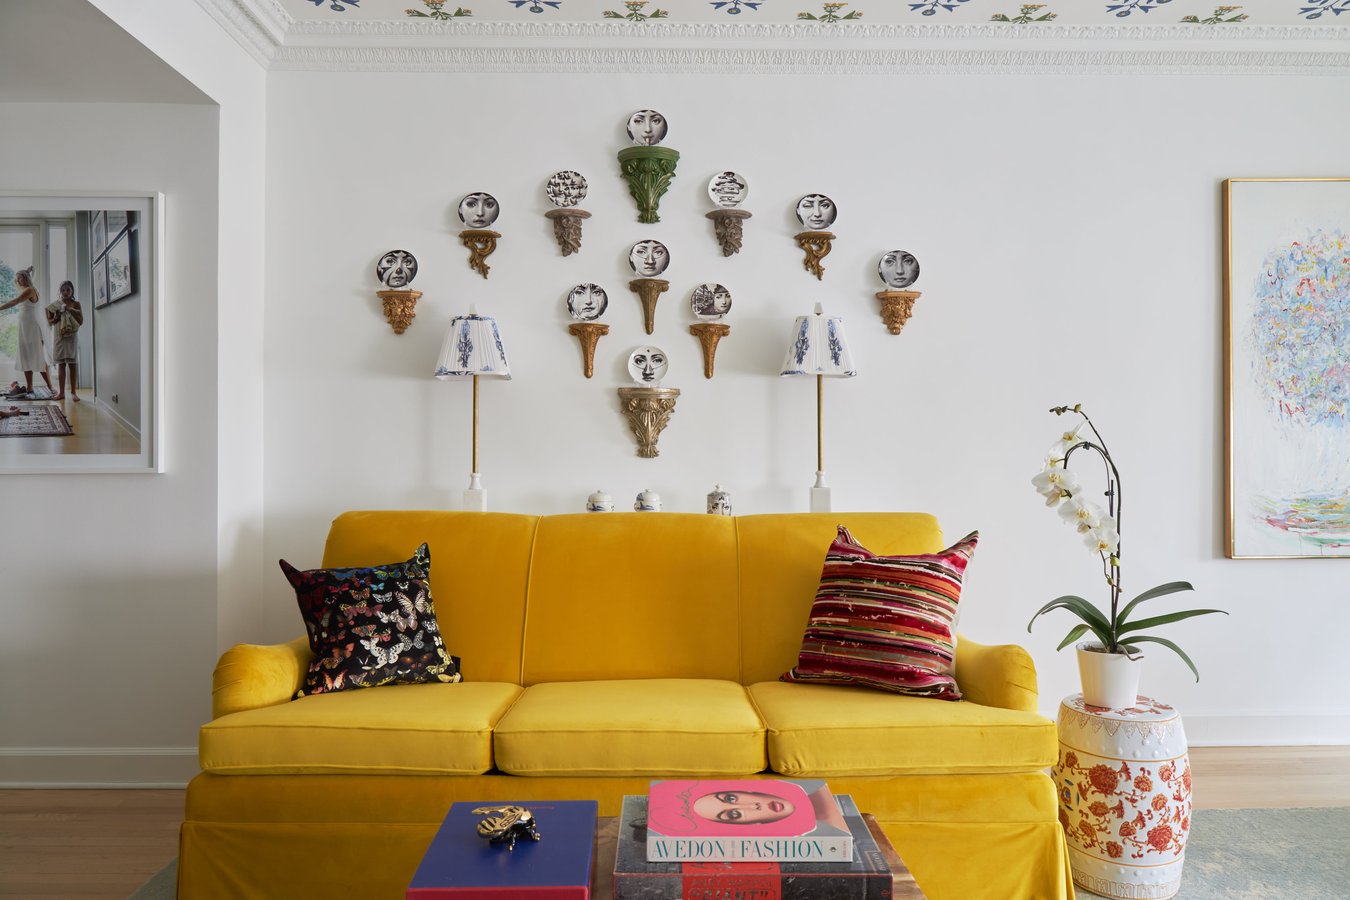 A bright yellow sofa with an ornate display of small plates with a person's face wearing different expressions - living room design by Jasmin Reese Interiors, Chicago, USA. 